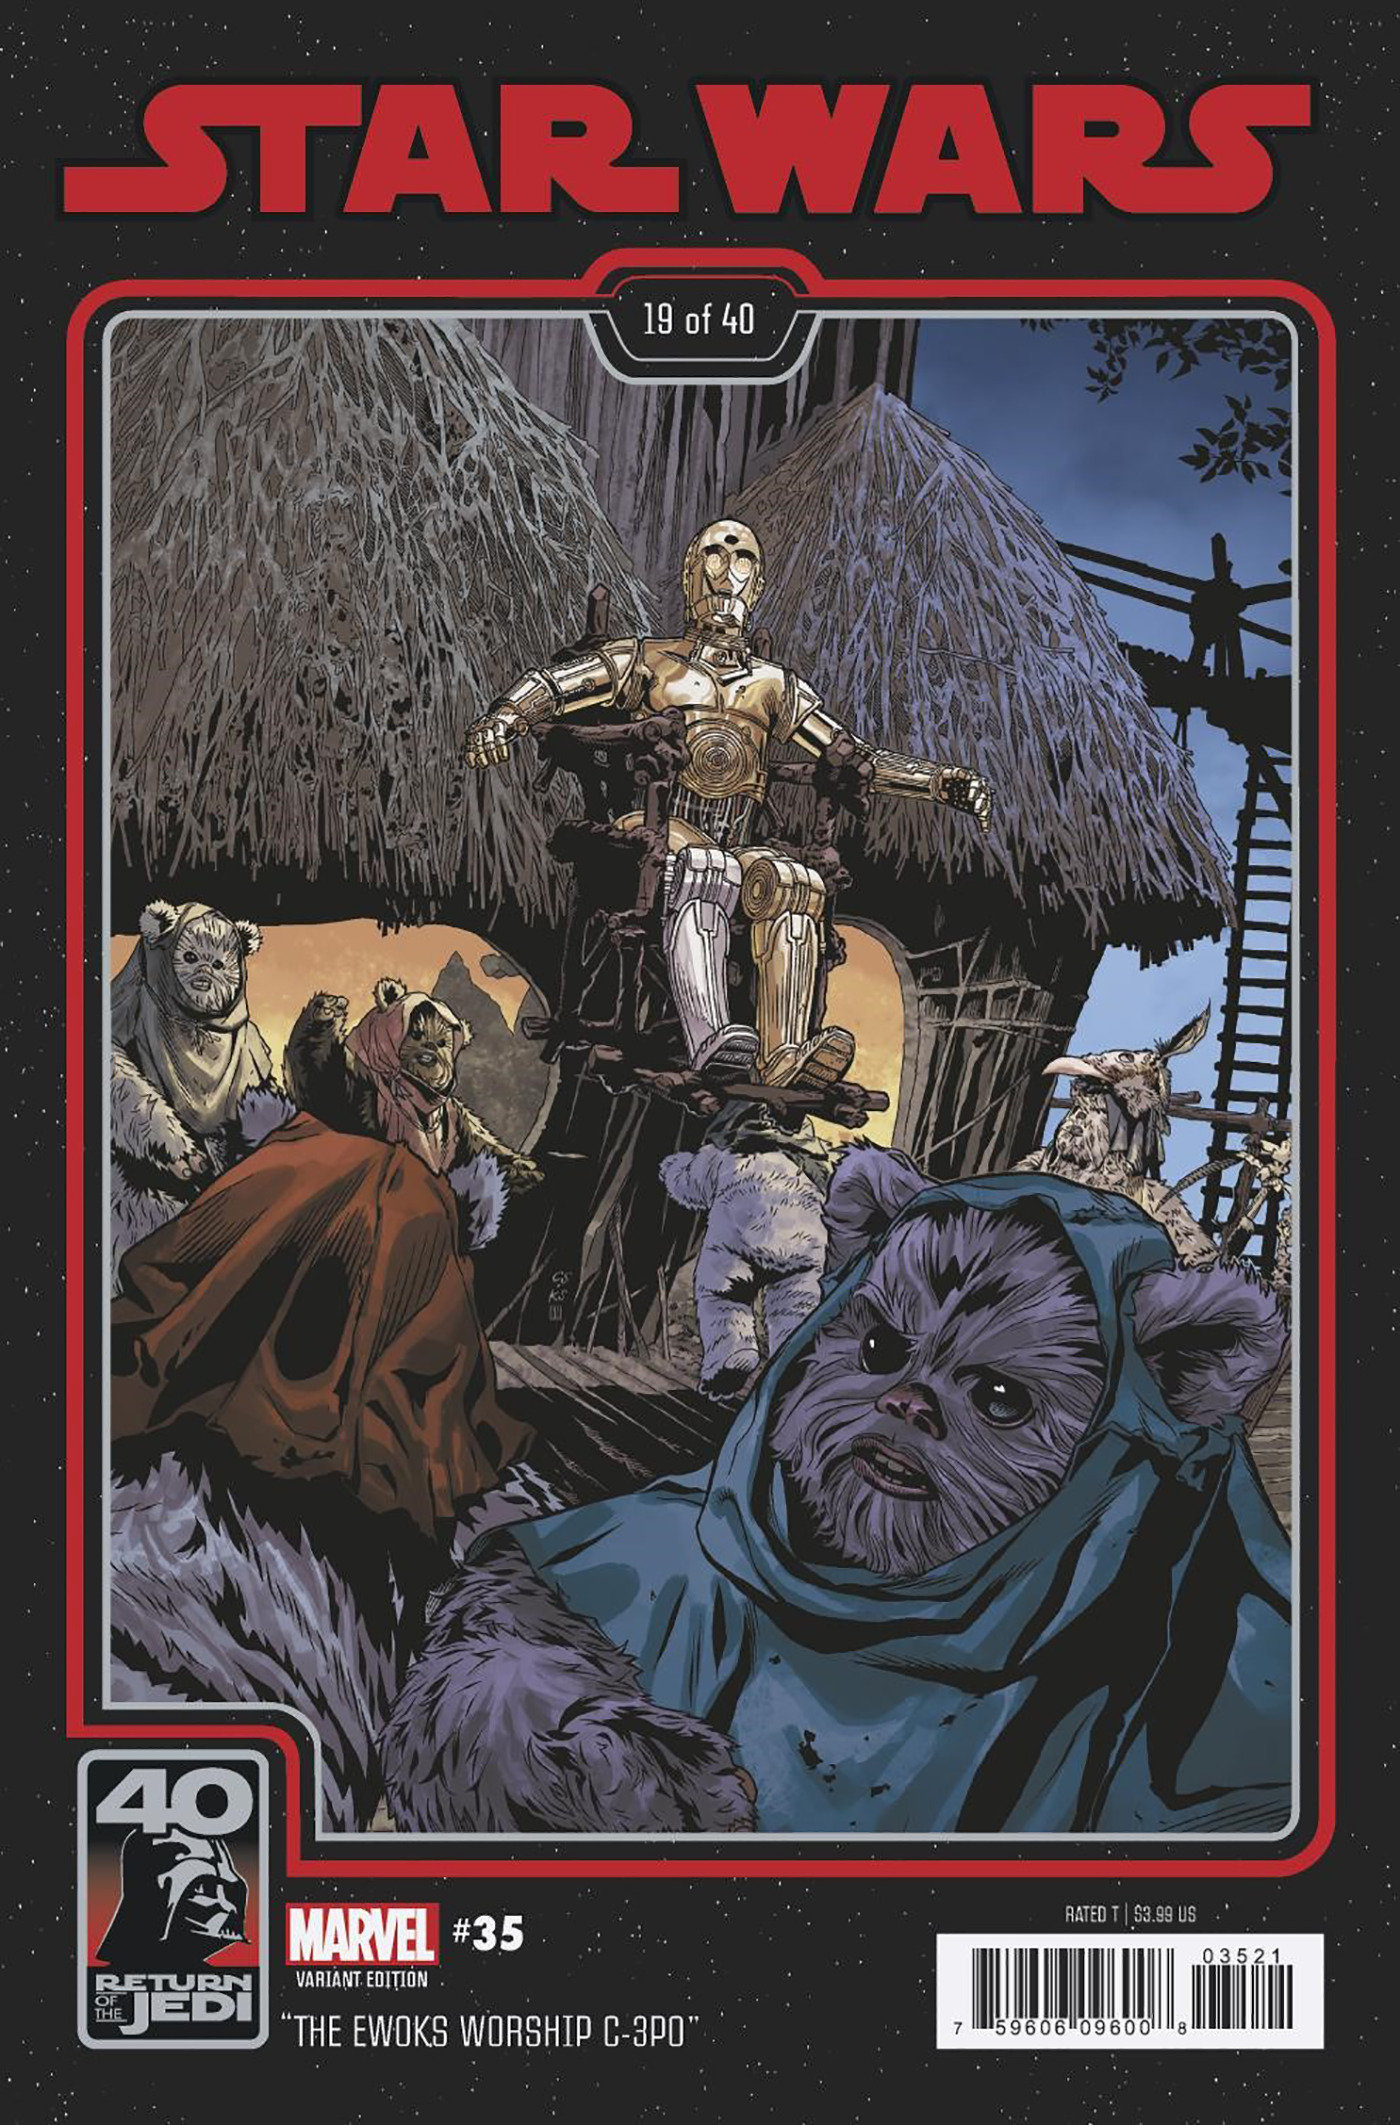 Star Wars #35 Chris Sprouse Return of the Jedi 40th Anniversary Variant